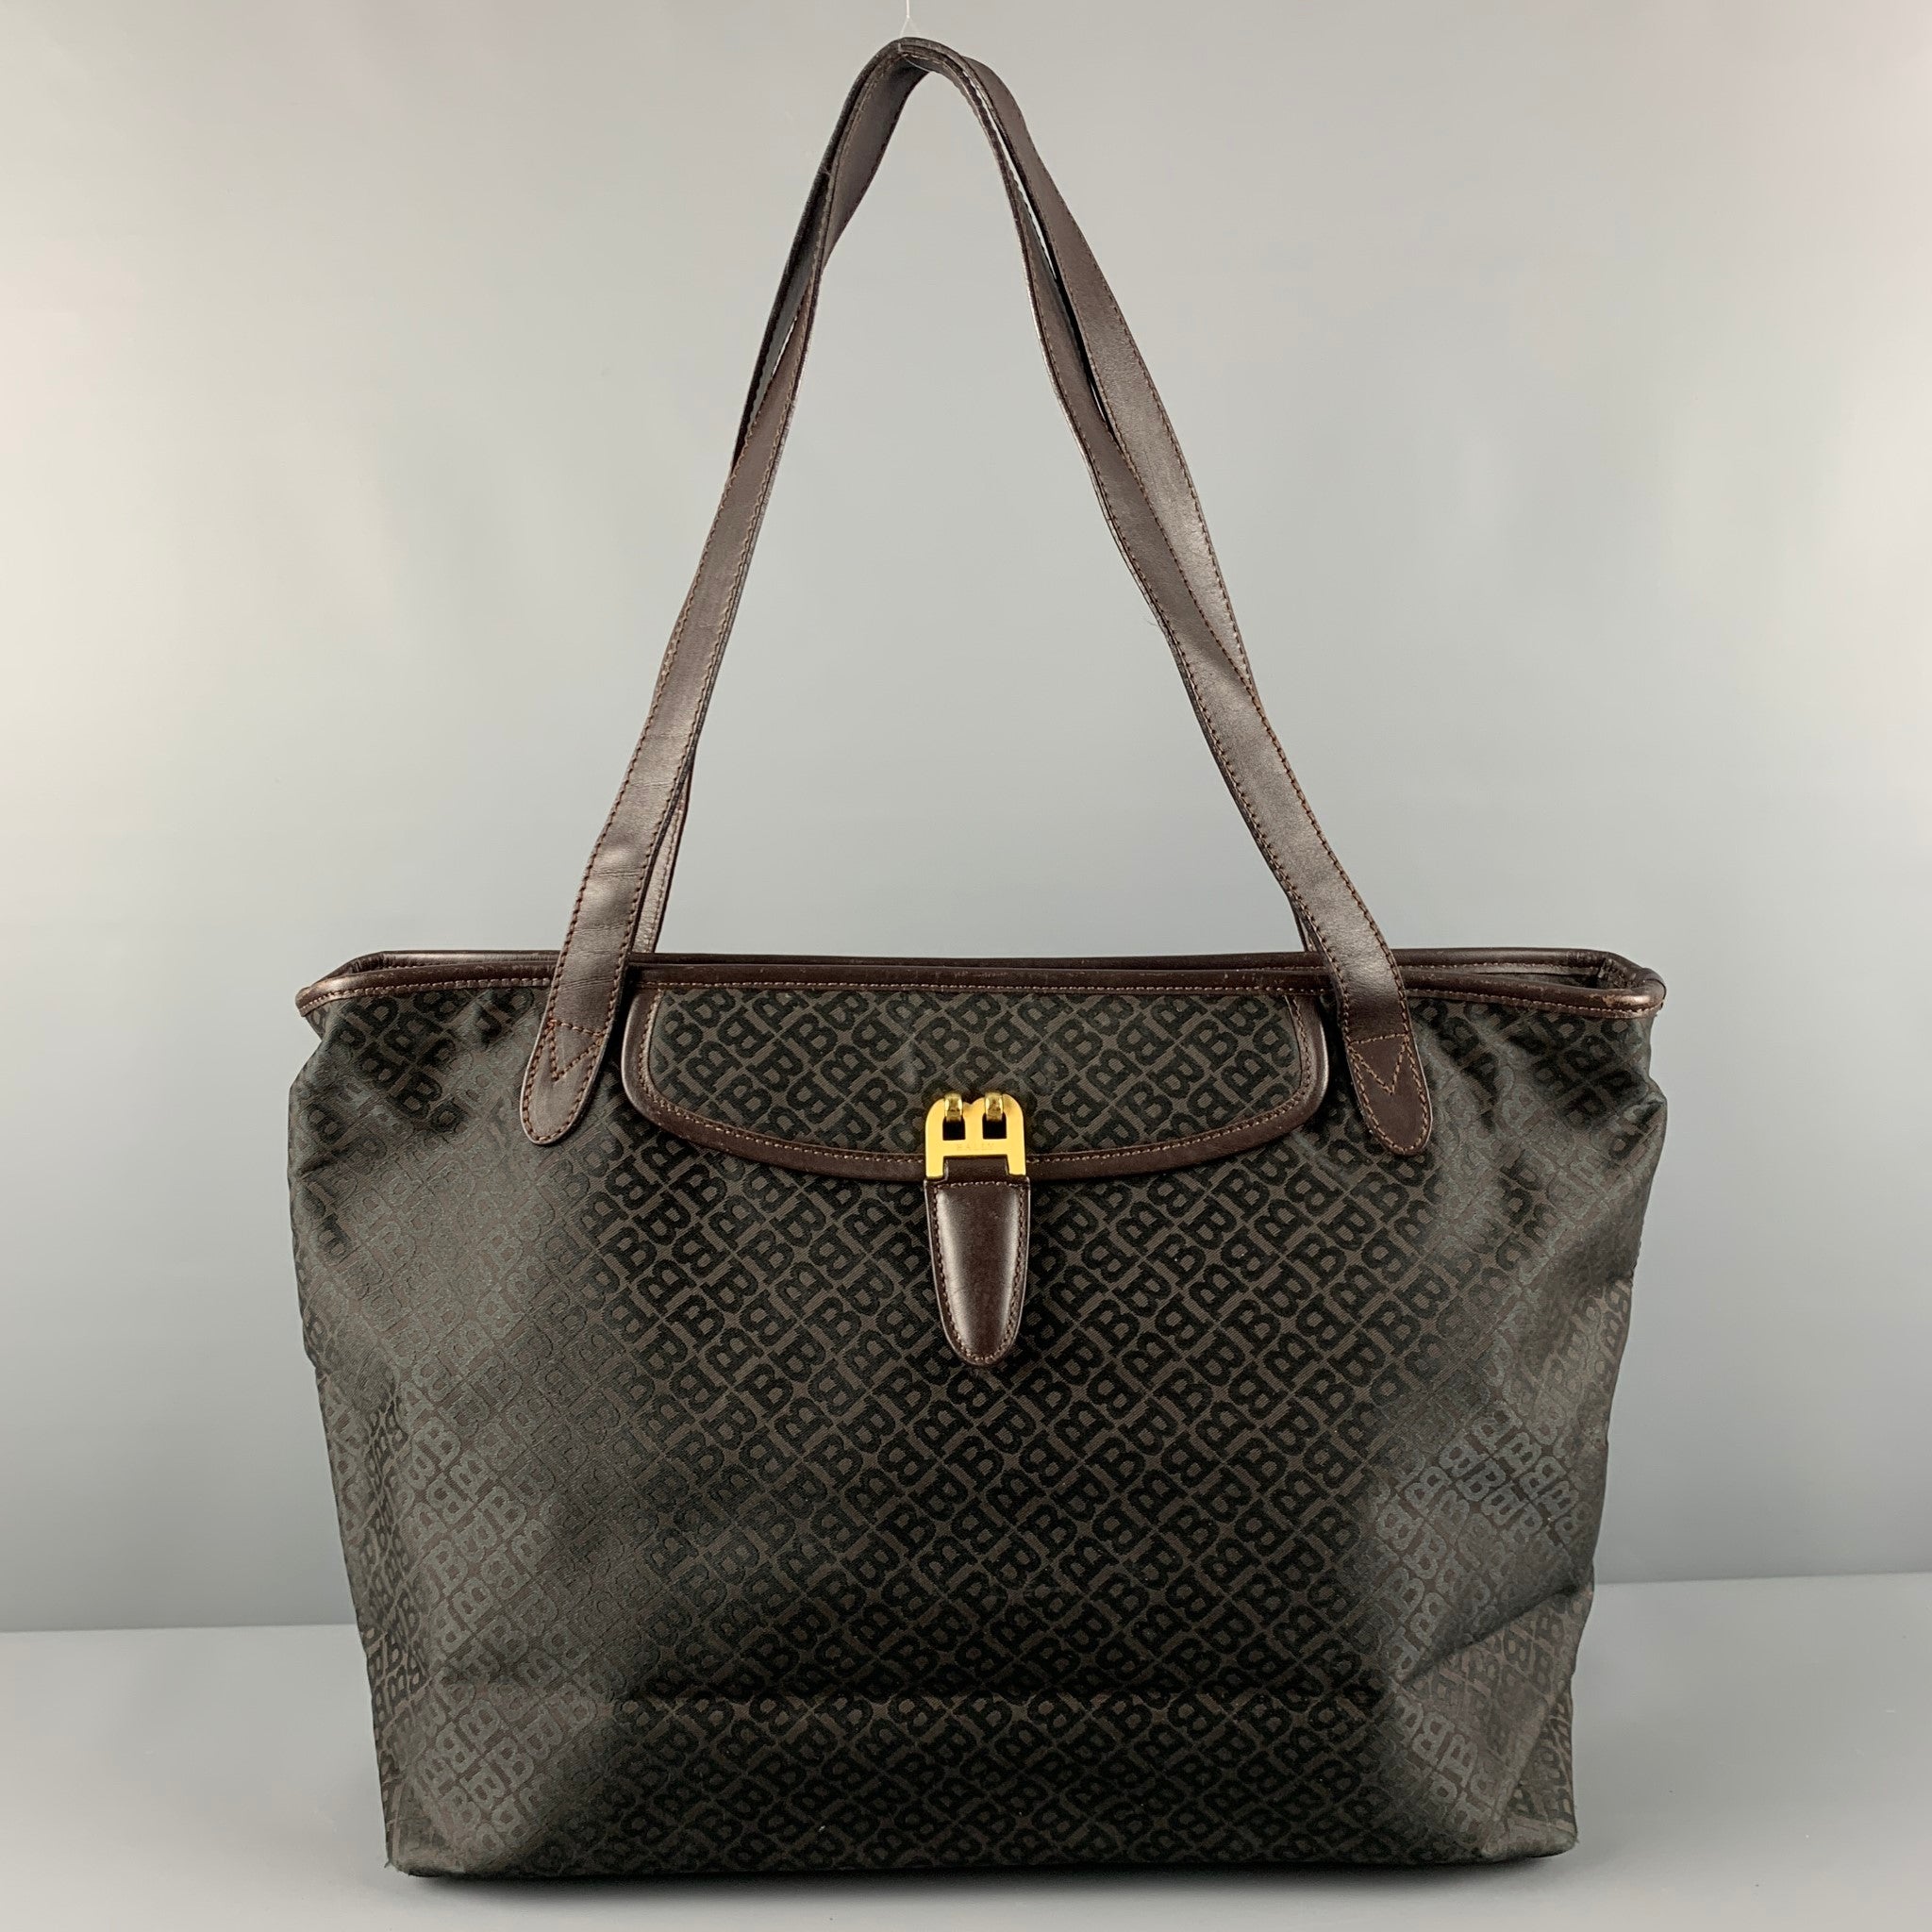 Gianni Versace Brown Monogram Canvas Fabric and Leather Tote Shoulder Bag